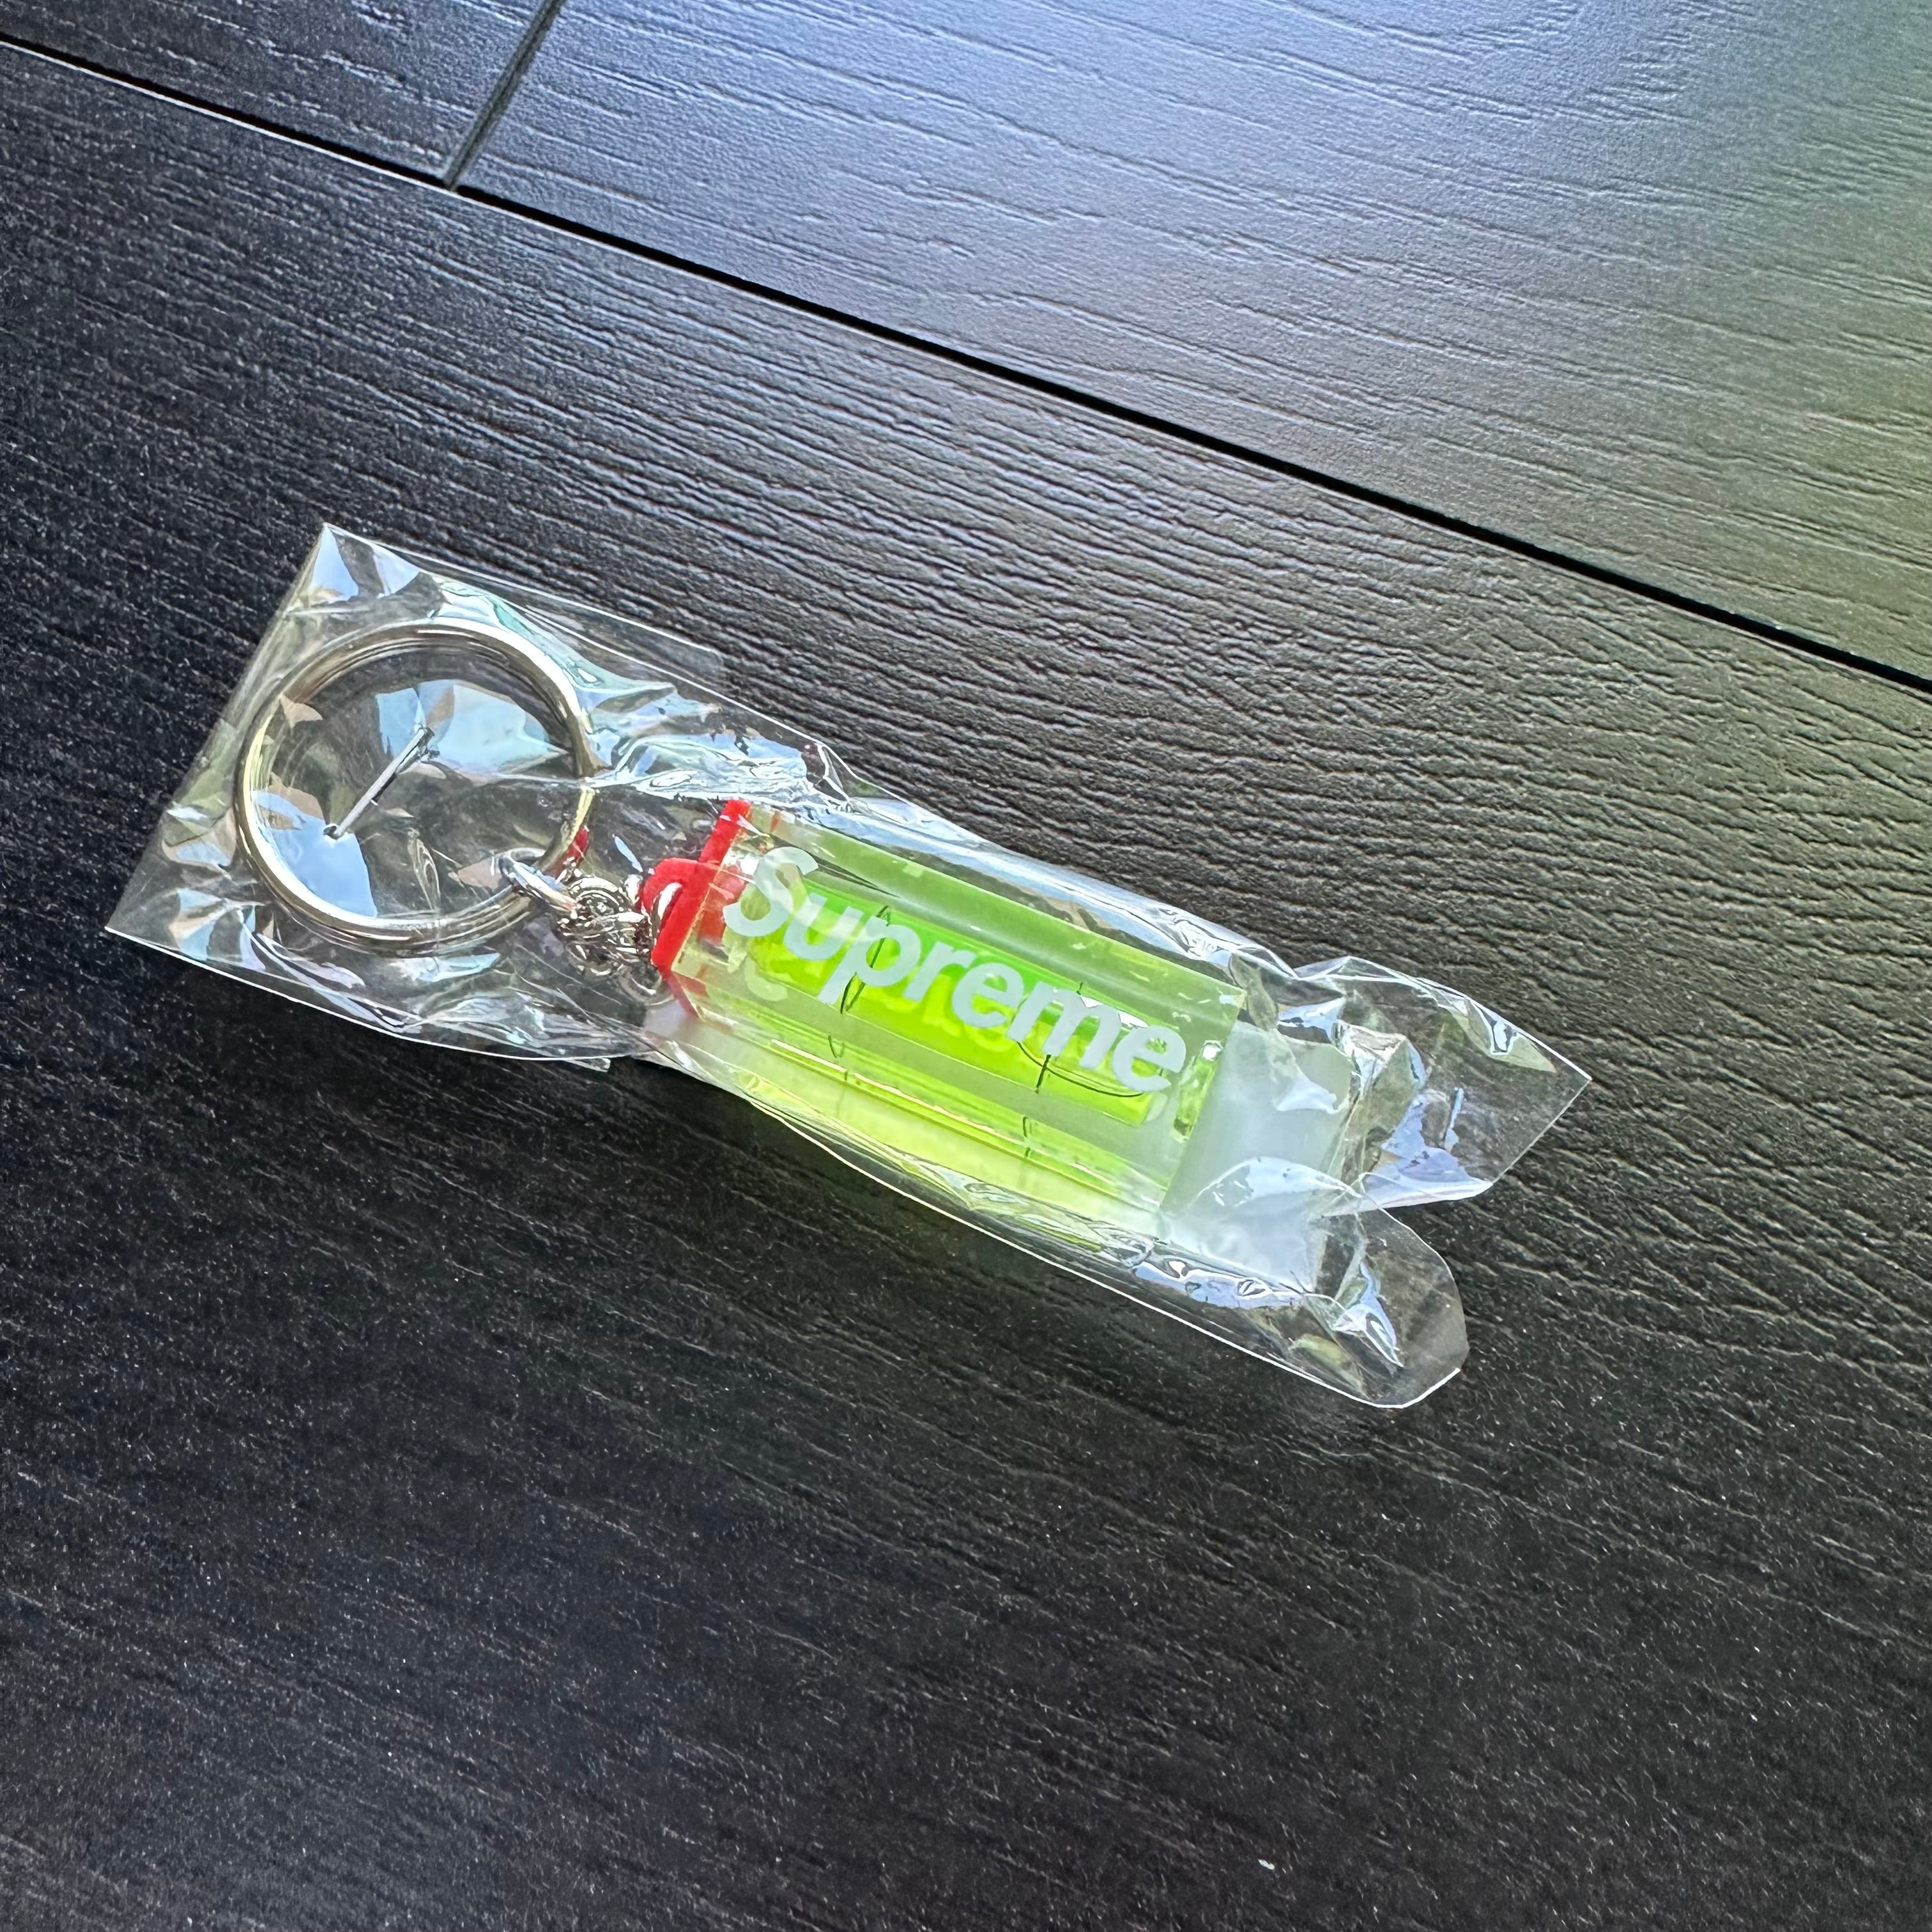 Supreme Level Keychain – Not Your Father's Gear